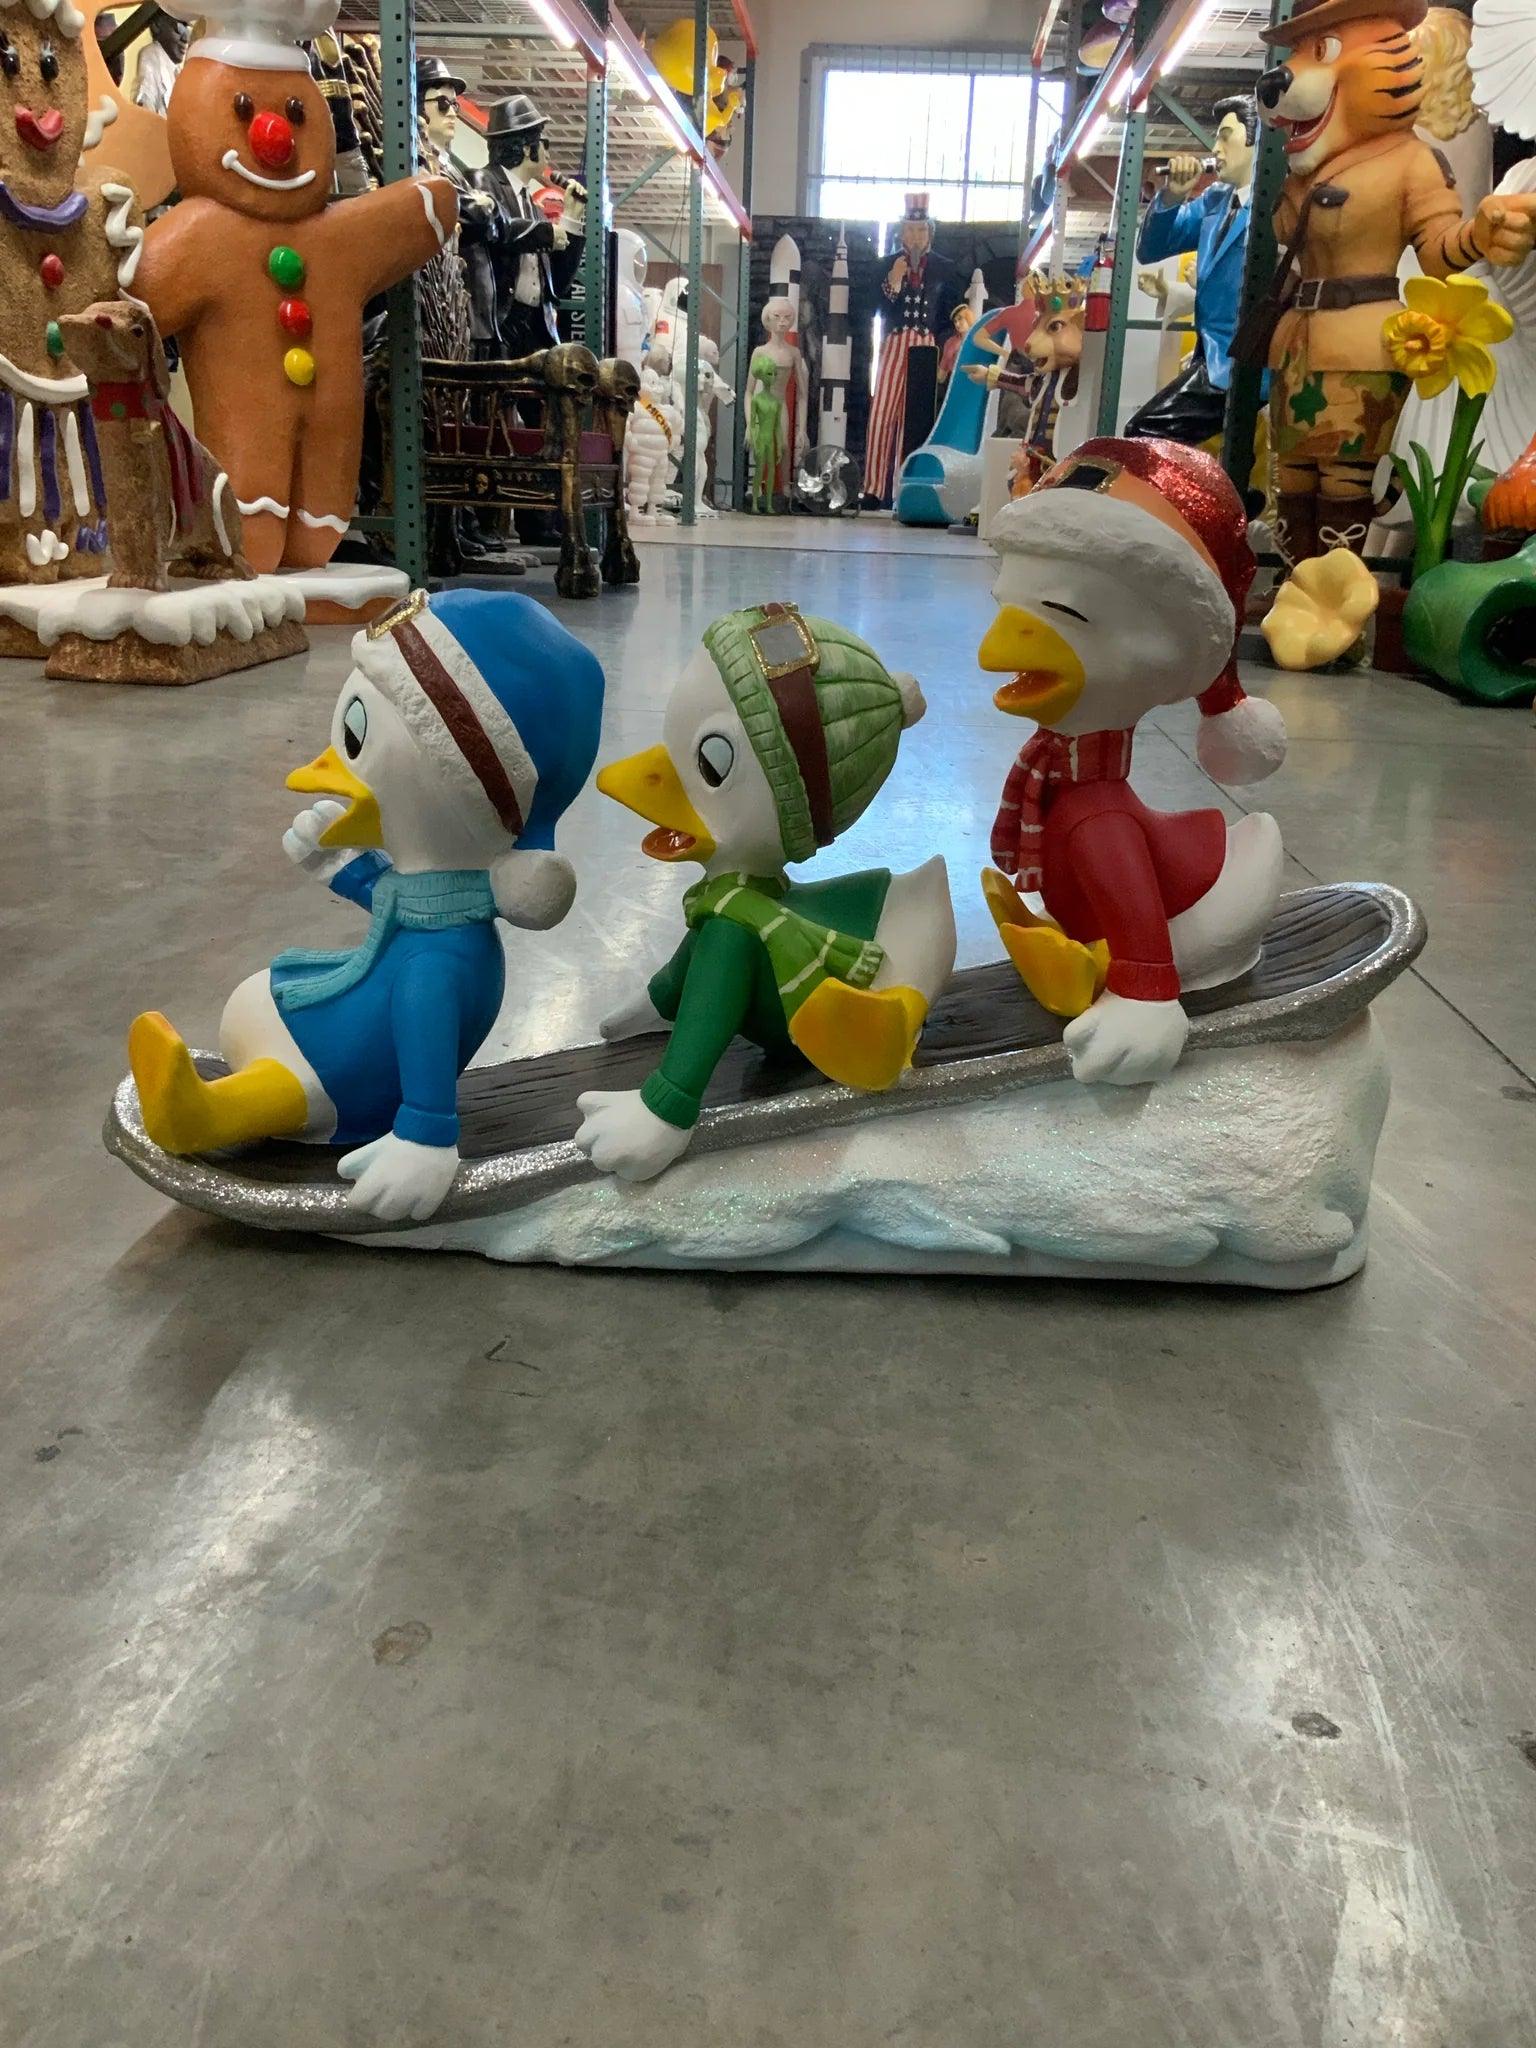 Small Ducklings On Snowboard Statue - LM Treasures Prop Rentals 